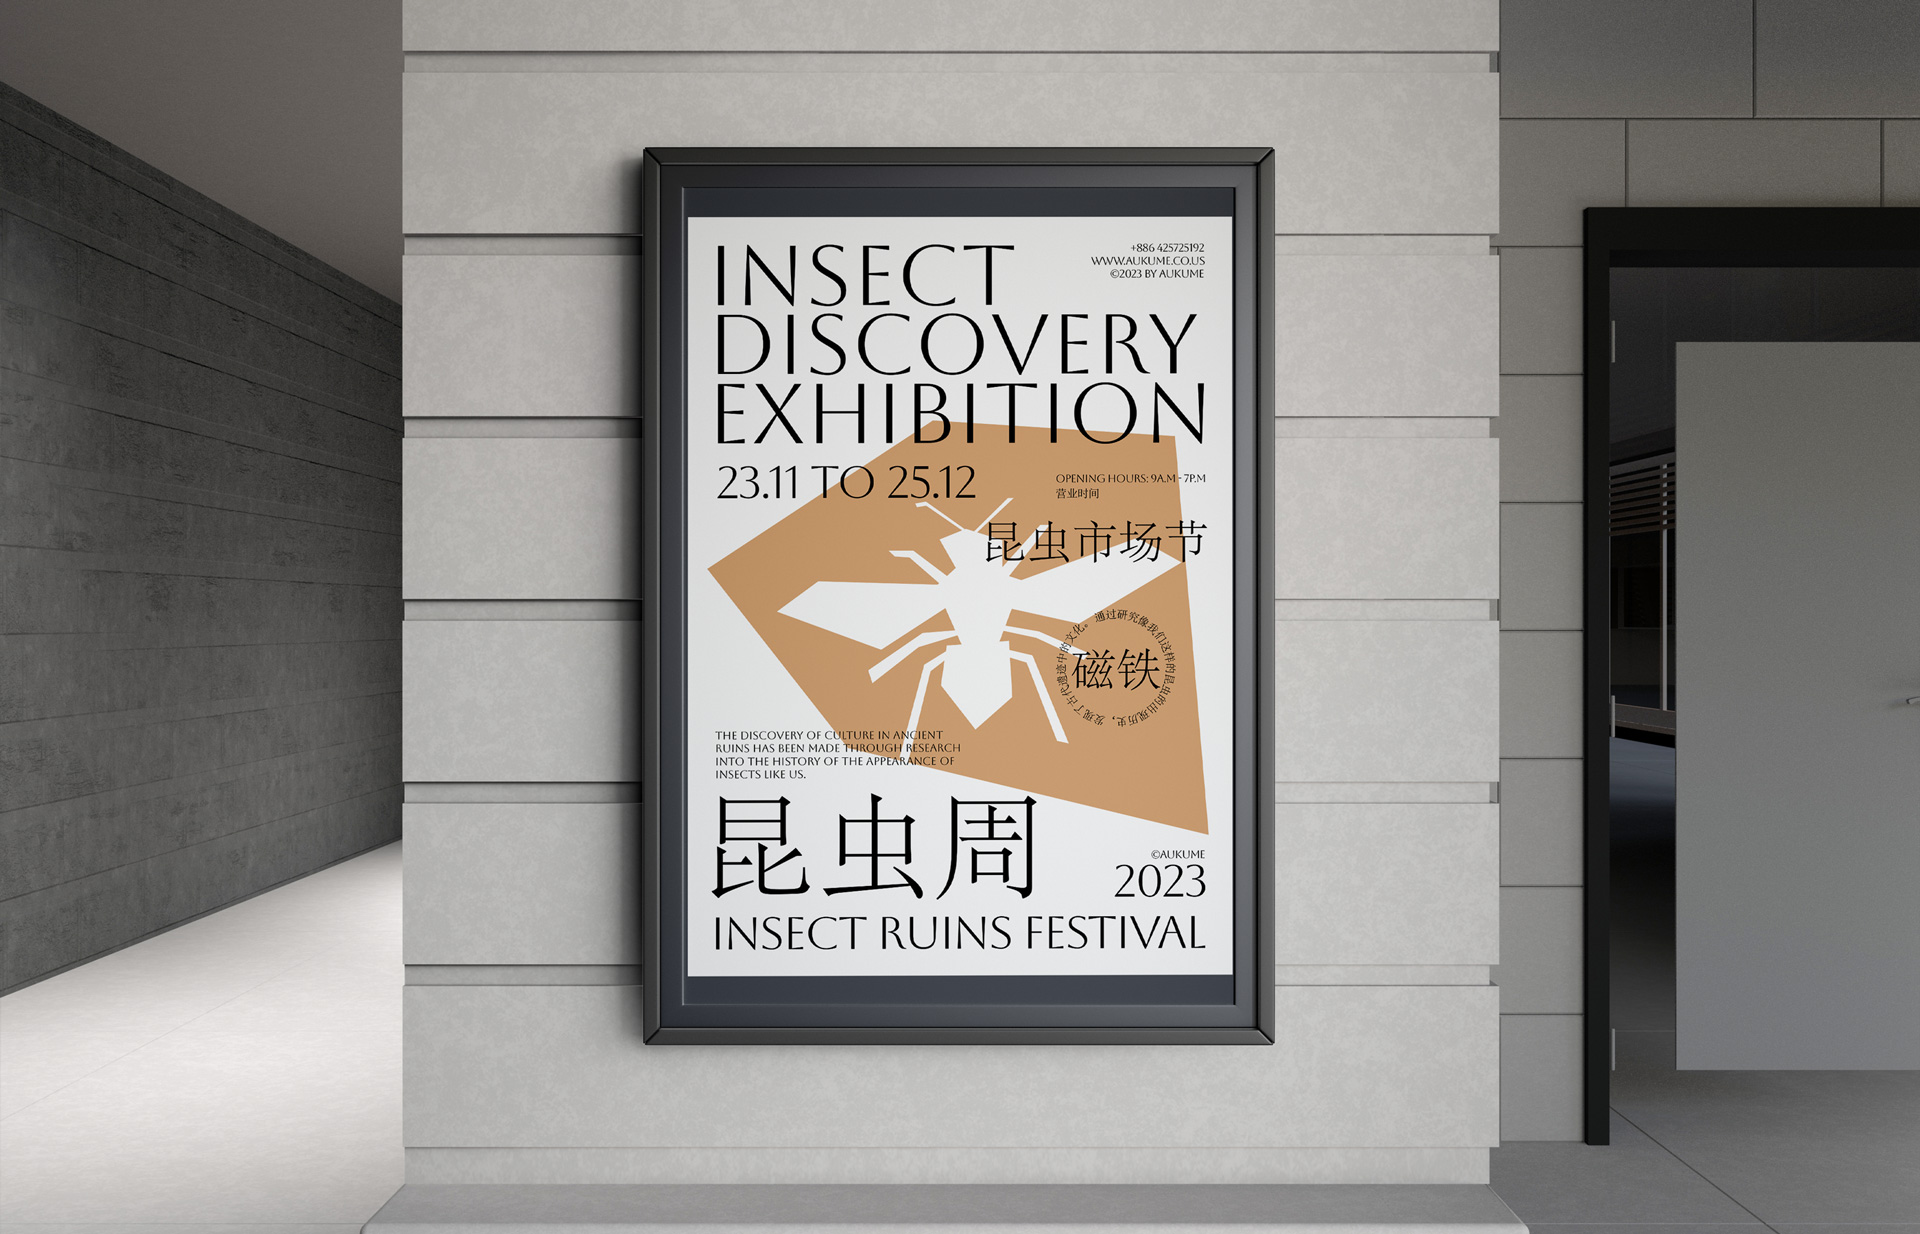 Jenni Hoang Creates Student Concept for Aukume Insect Discovery Exhitbition